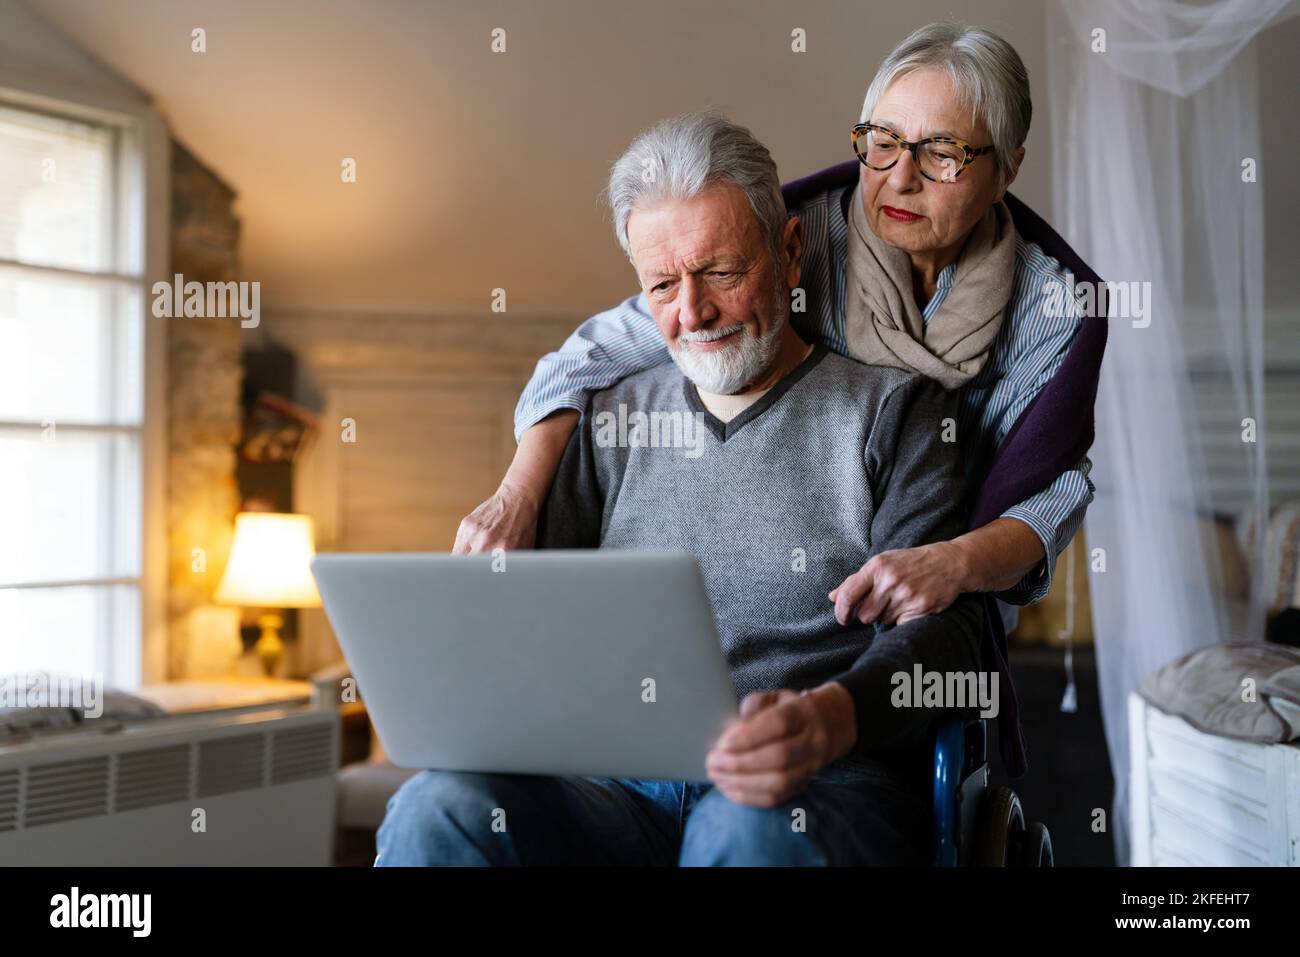 Loving older couple in a nursing home together. Senior people technology concept Stock Photo